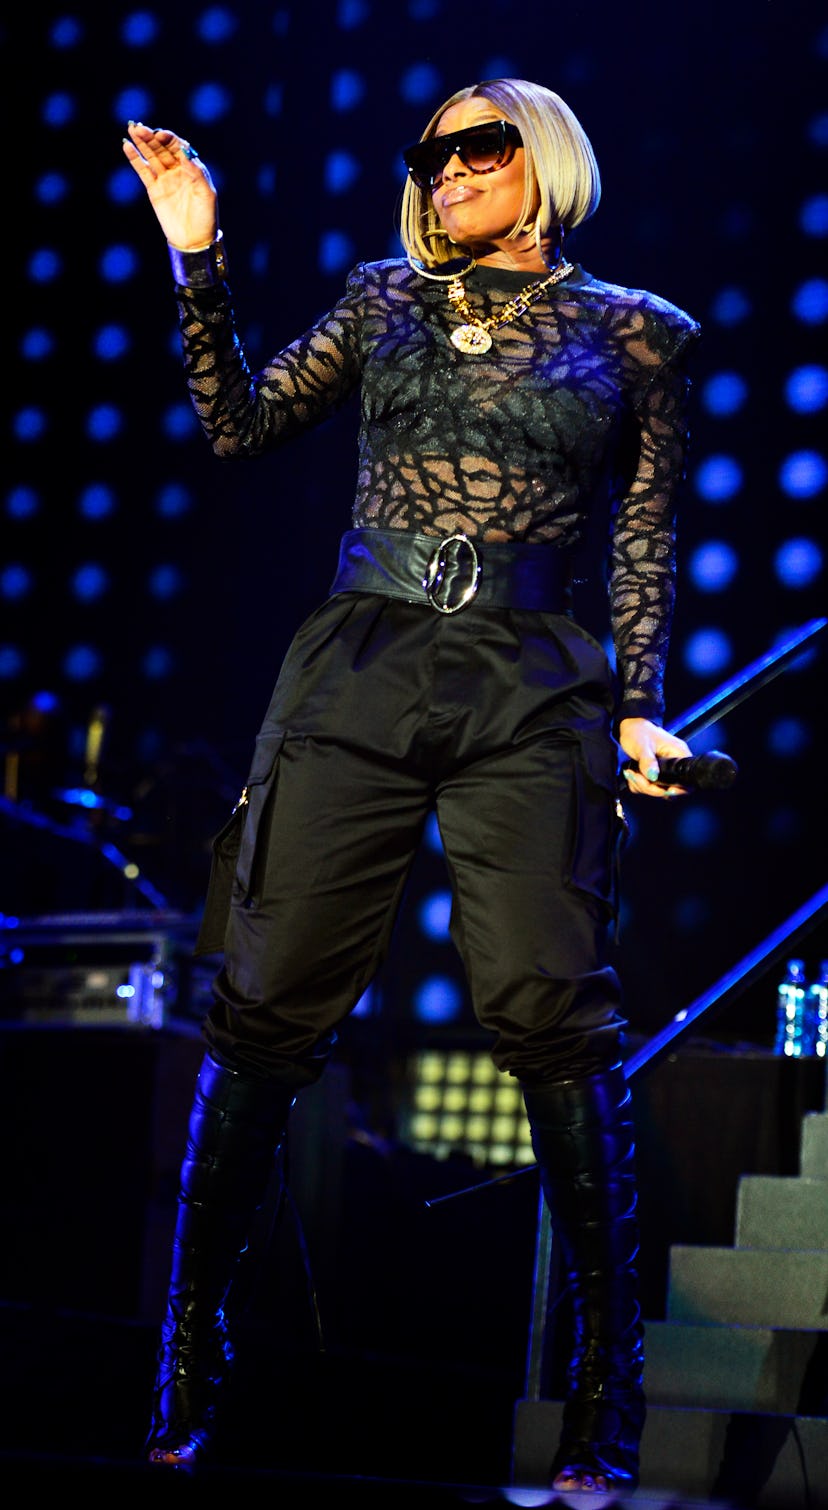 Mary J. Blige in a sheer top and trousers.